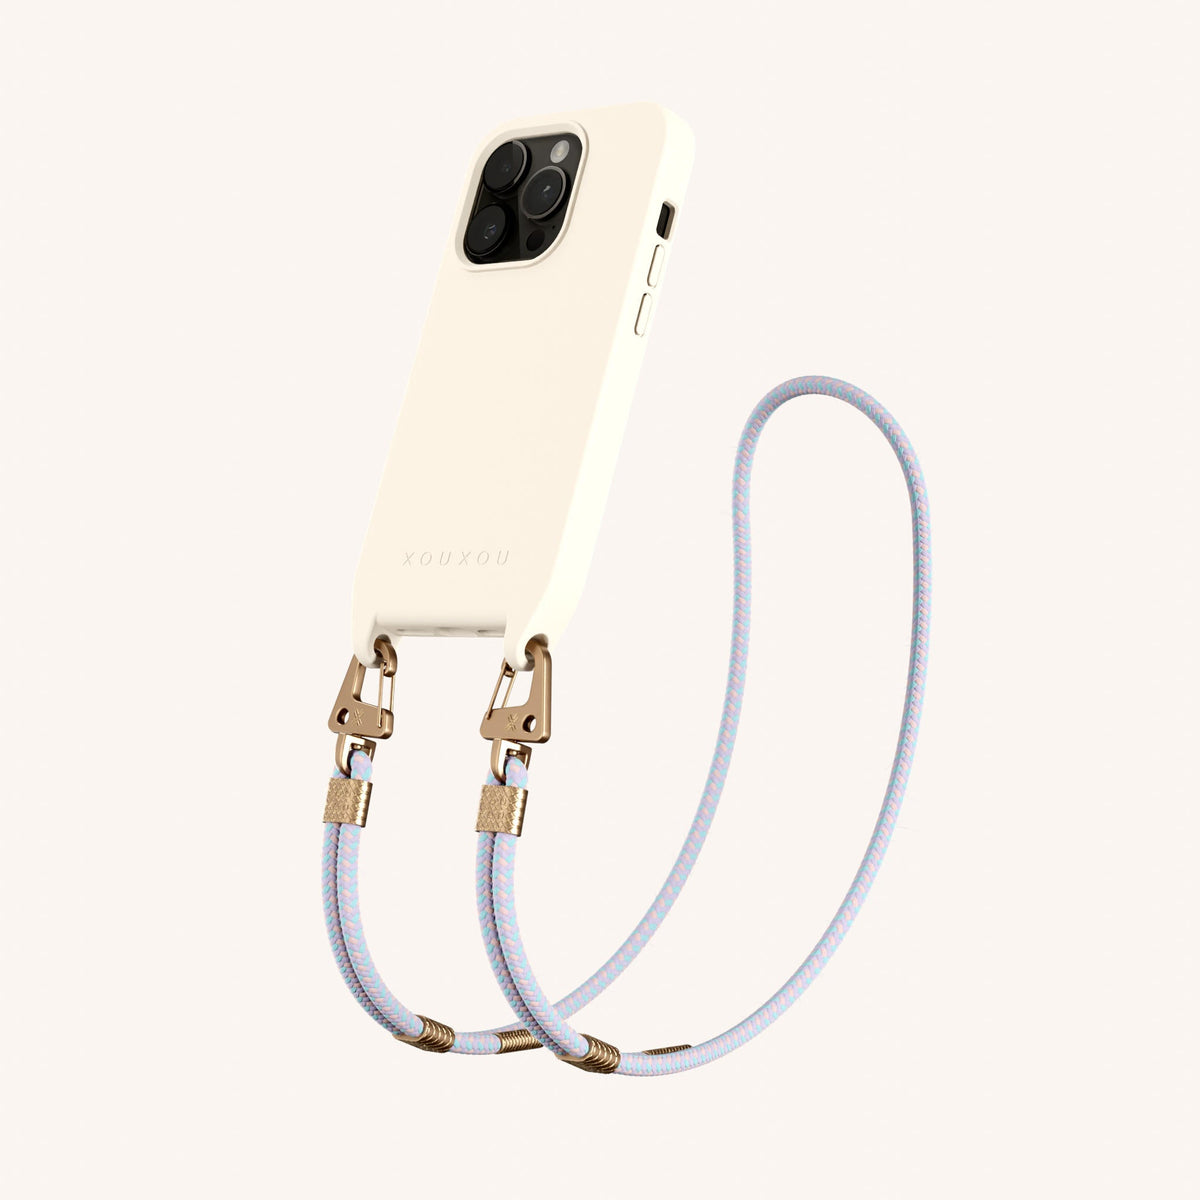 Phone Necklace with Carabiner Rope for iPhone 15 Pro with MagSafe in Chalk + Vibrant Pastel Perspective View | XOUXOU #phone model_iphone 15 pro